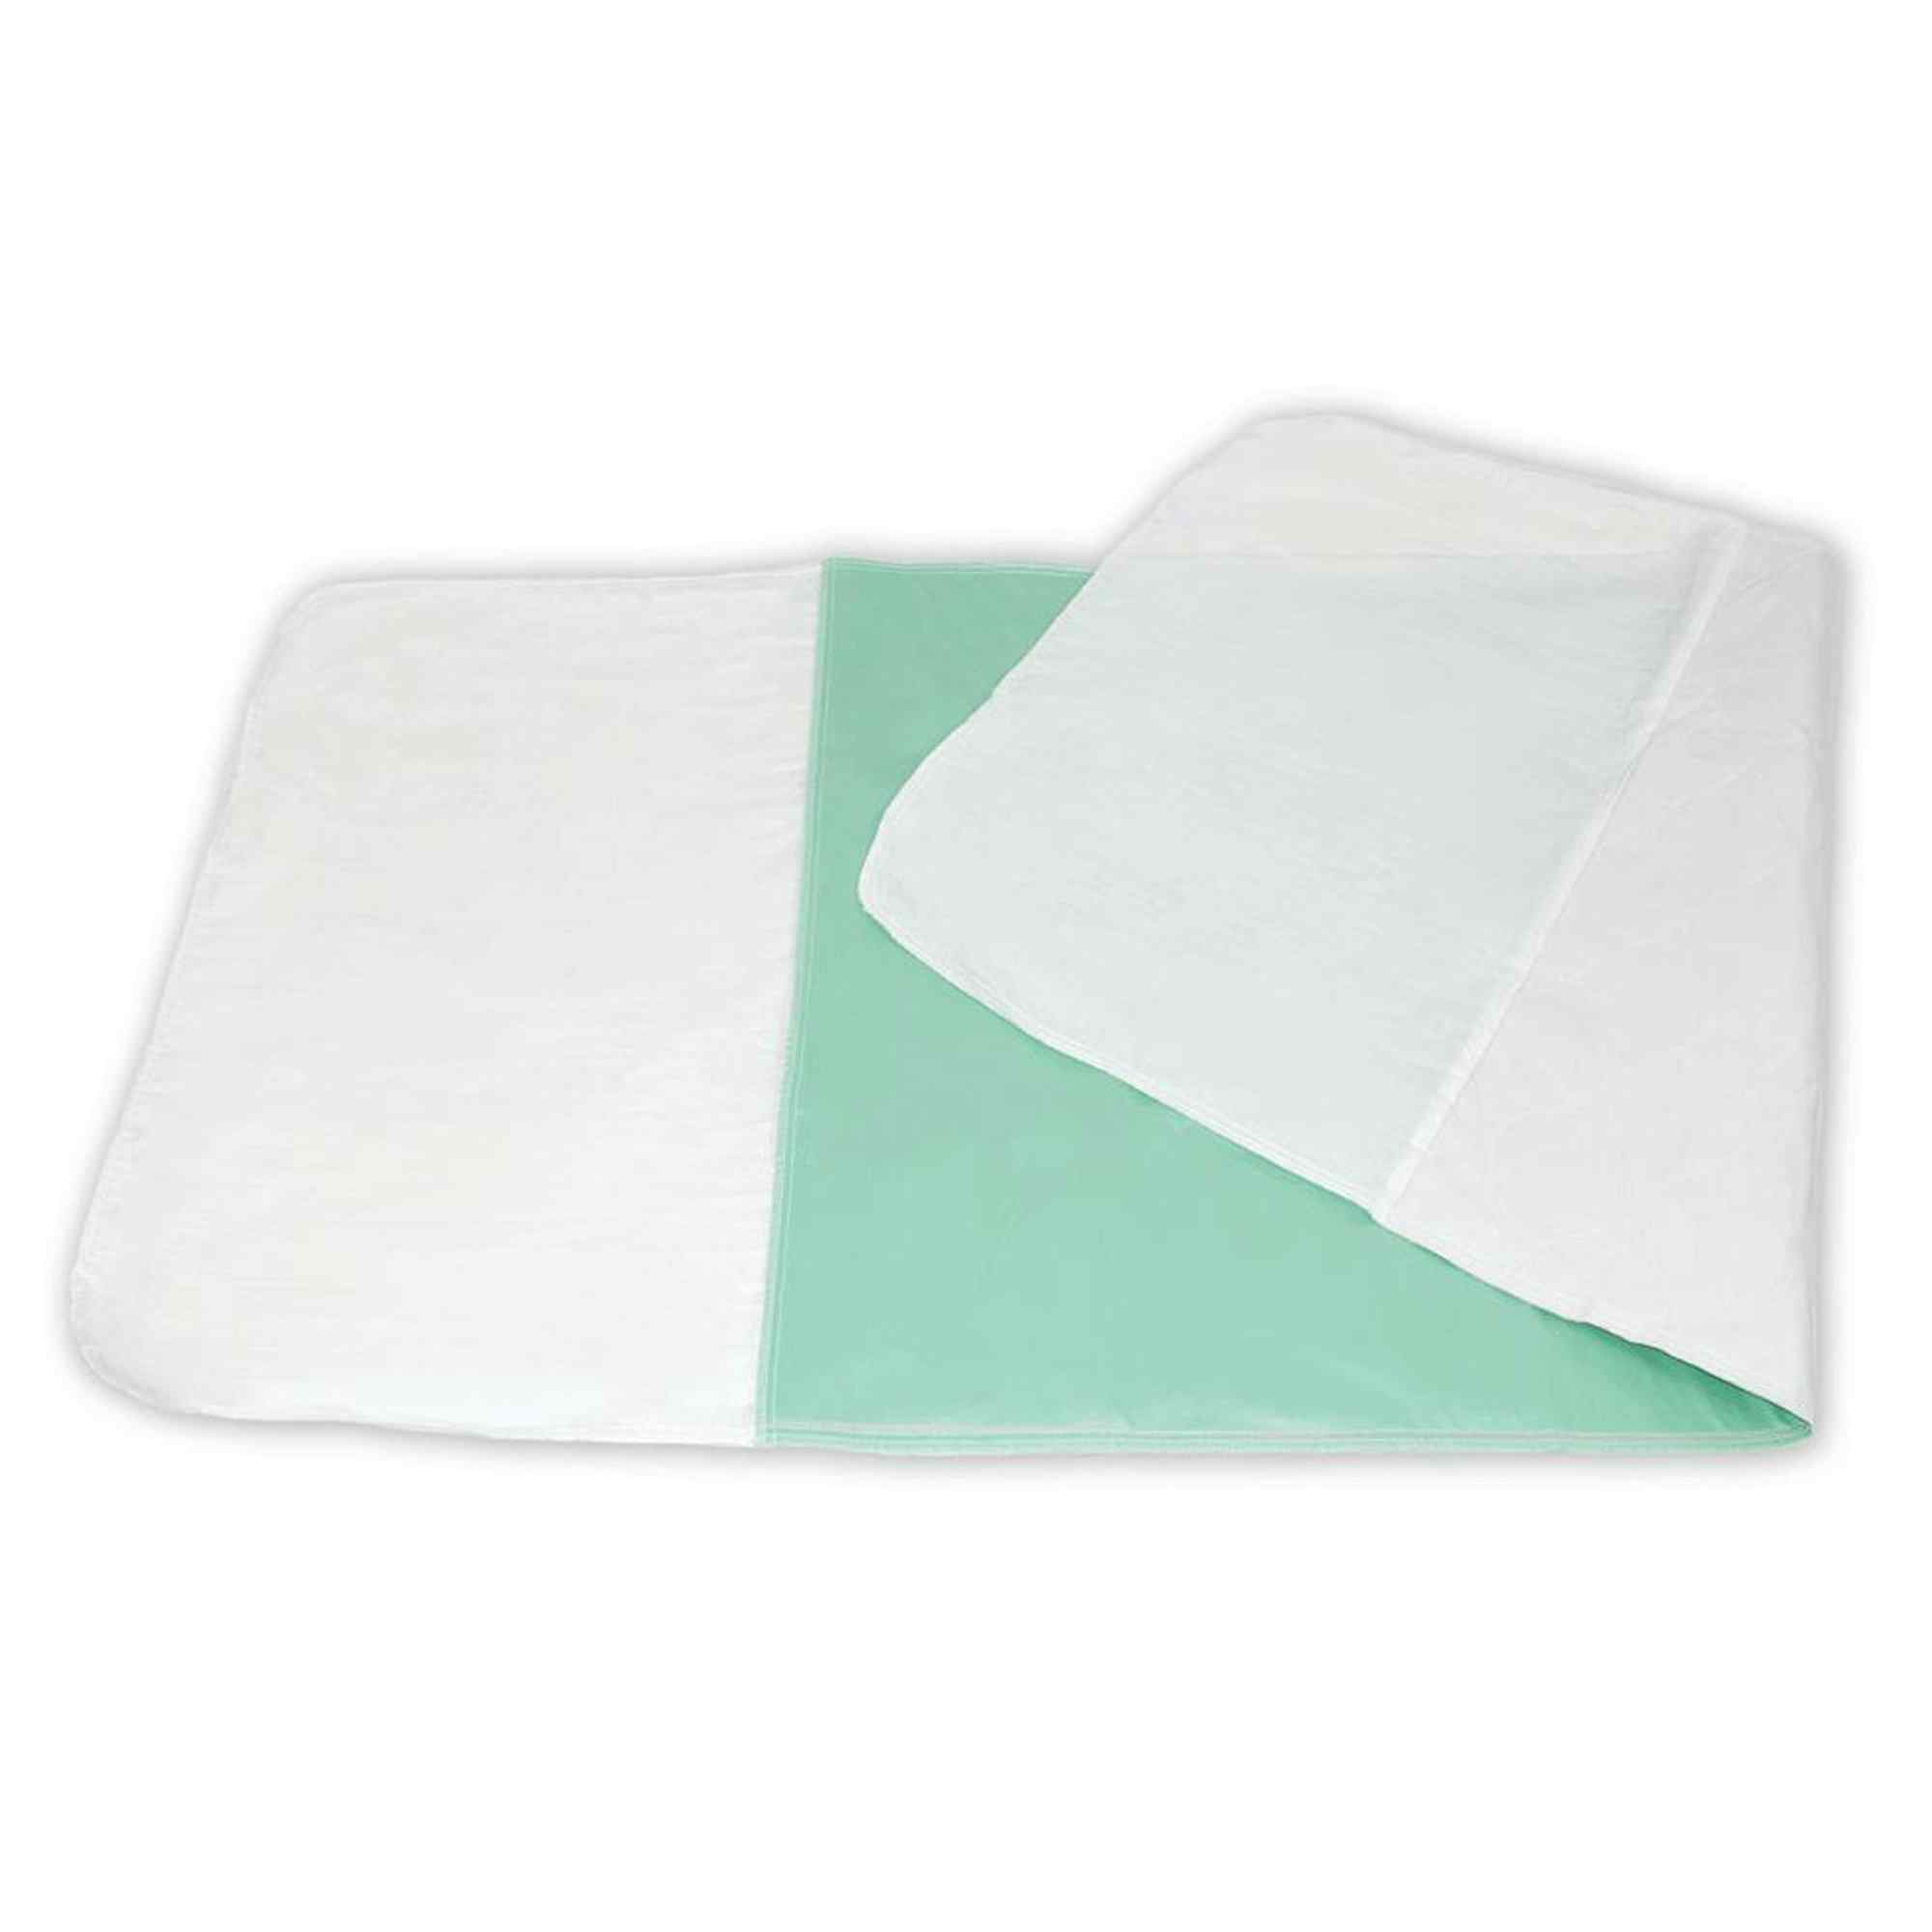 Abena Reusable Underpad with Tuckable Flaps, Moderate Absorbency, 2592, 30 X 72" - 1 Each